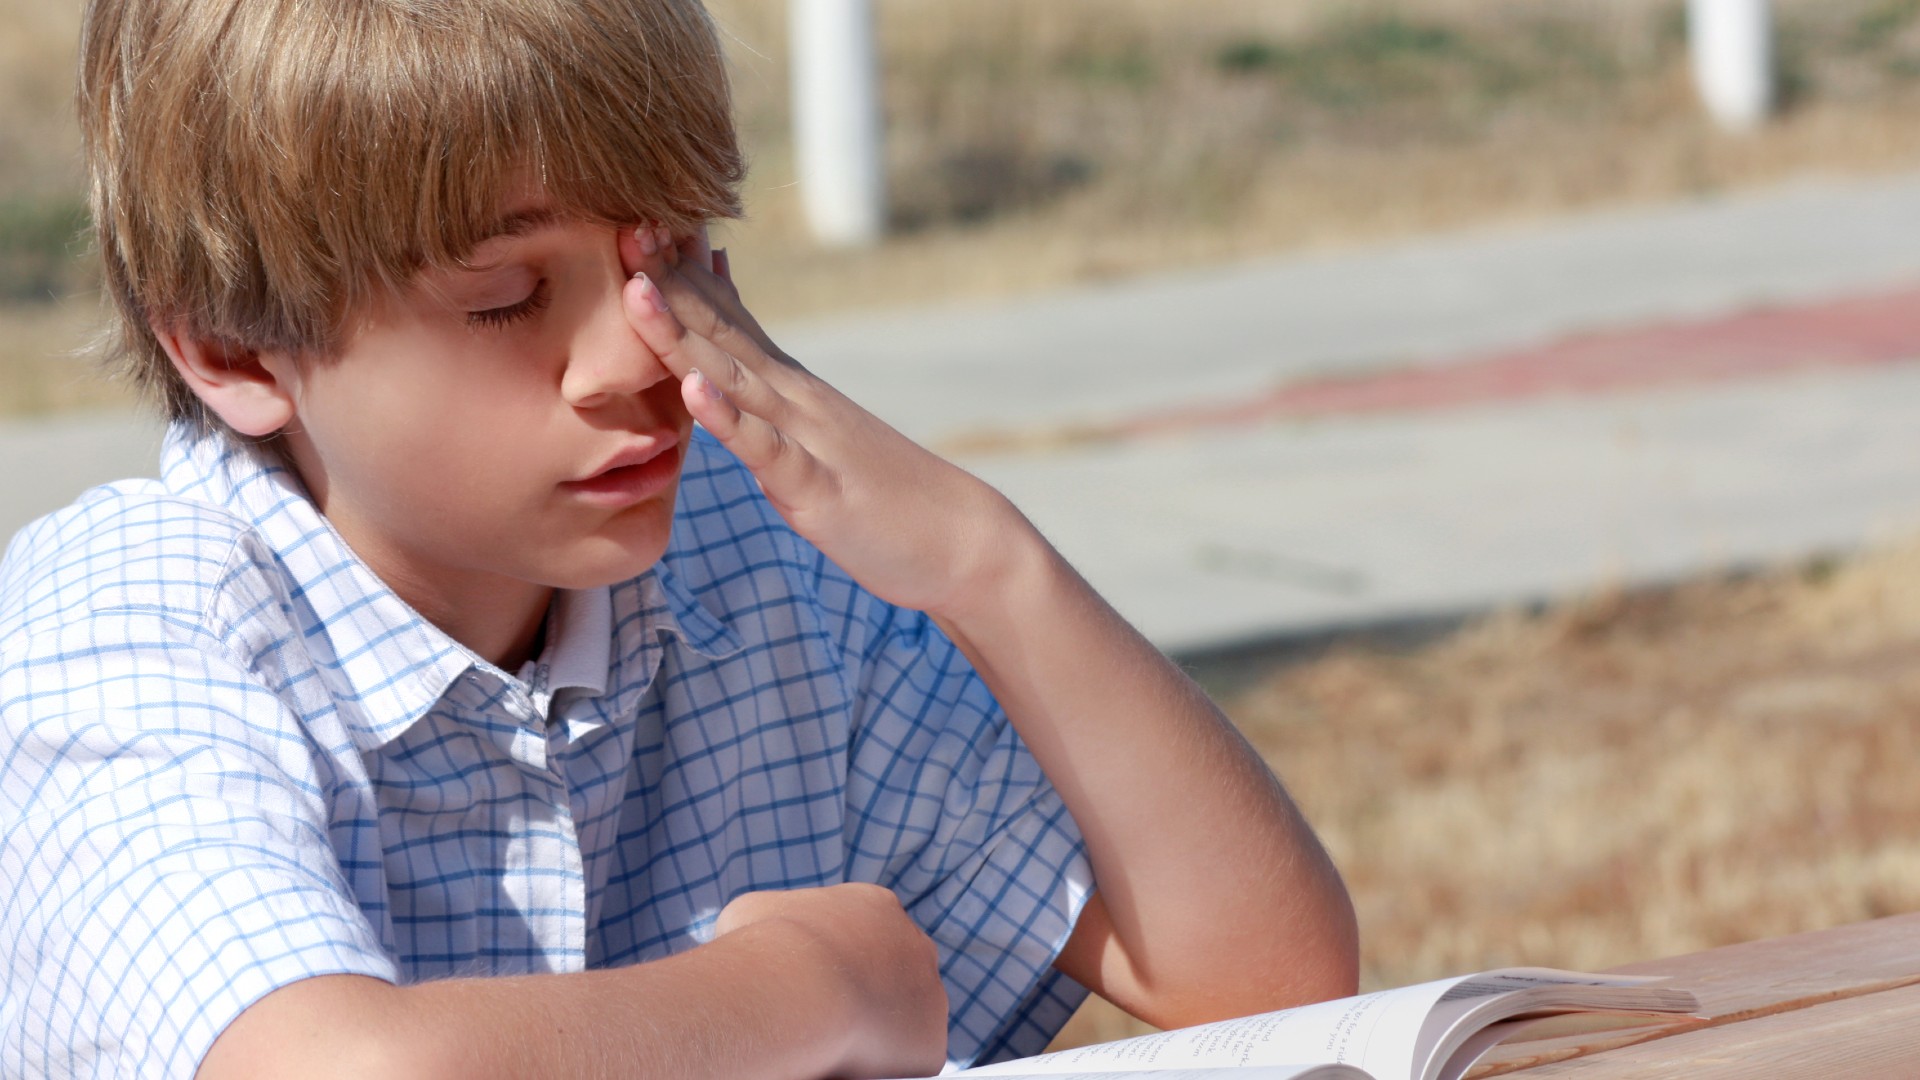 Very bored teenager at an outside table trying to read. J. McPhail via Shutterstock